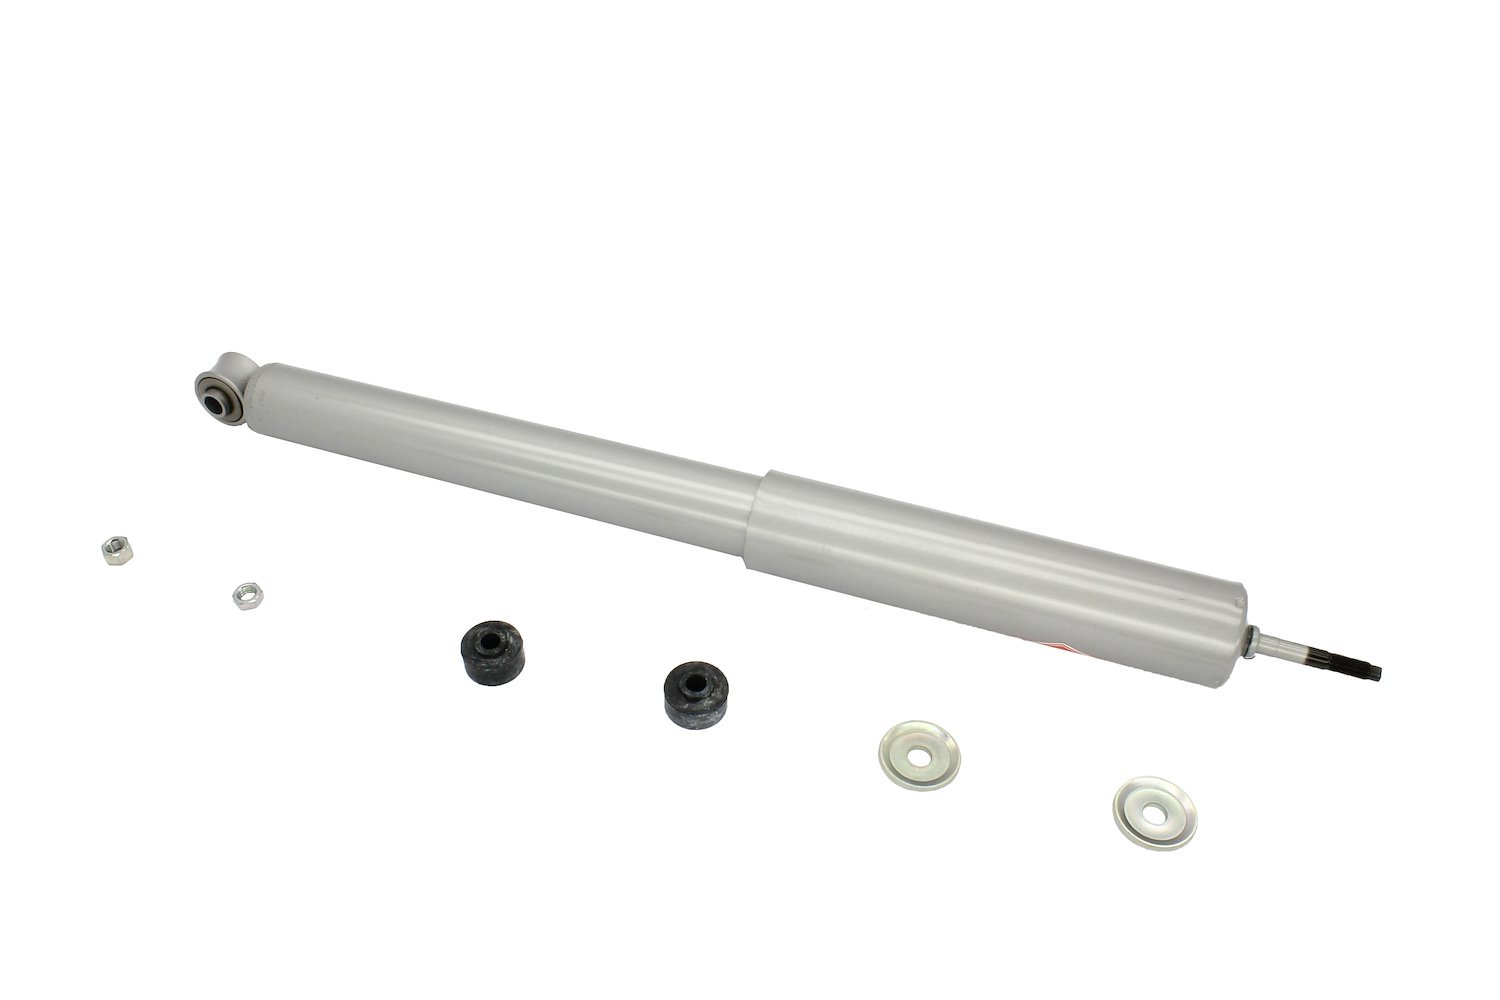 Gas-a-Just Shock Absorber [Rear] Fits Select 1980-1988 Ford, Select 1982-1992 Lincoln, Select 1980-1988 Mercury